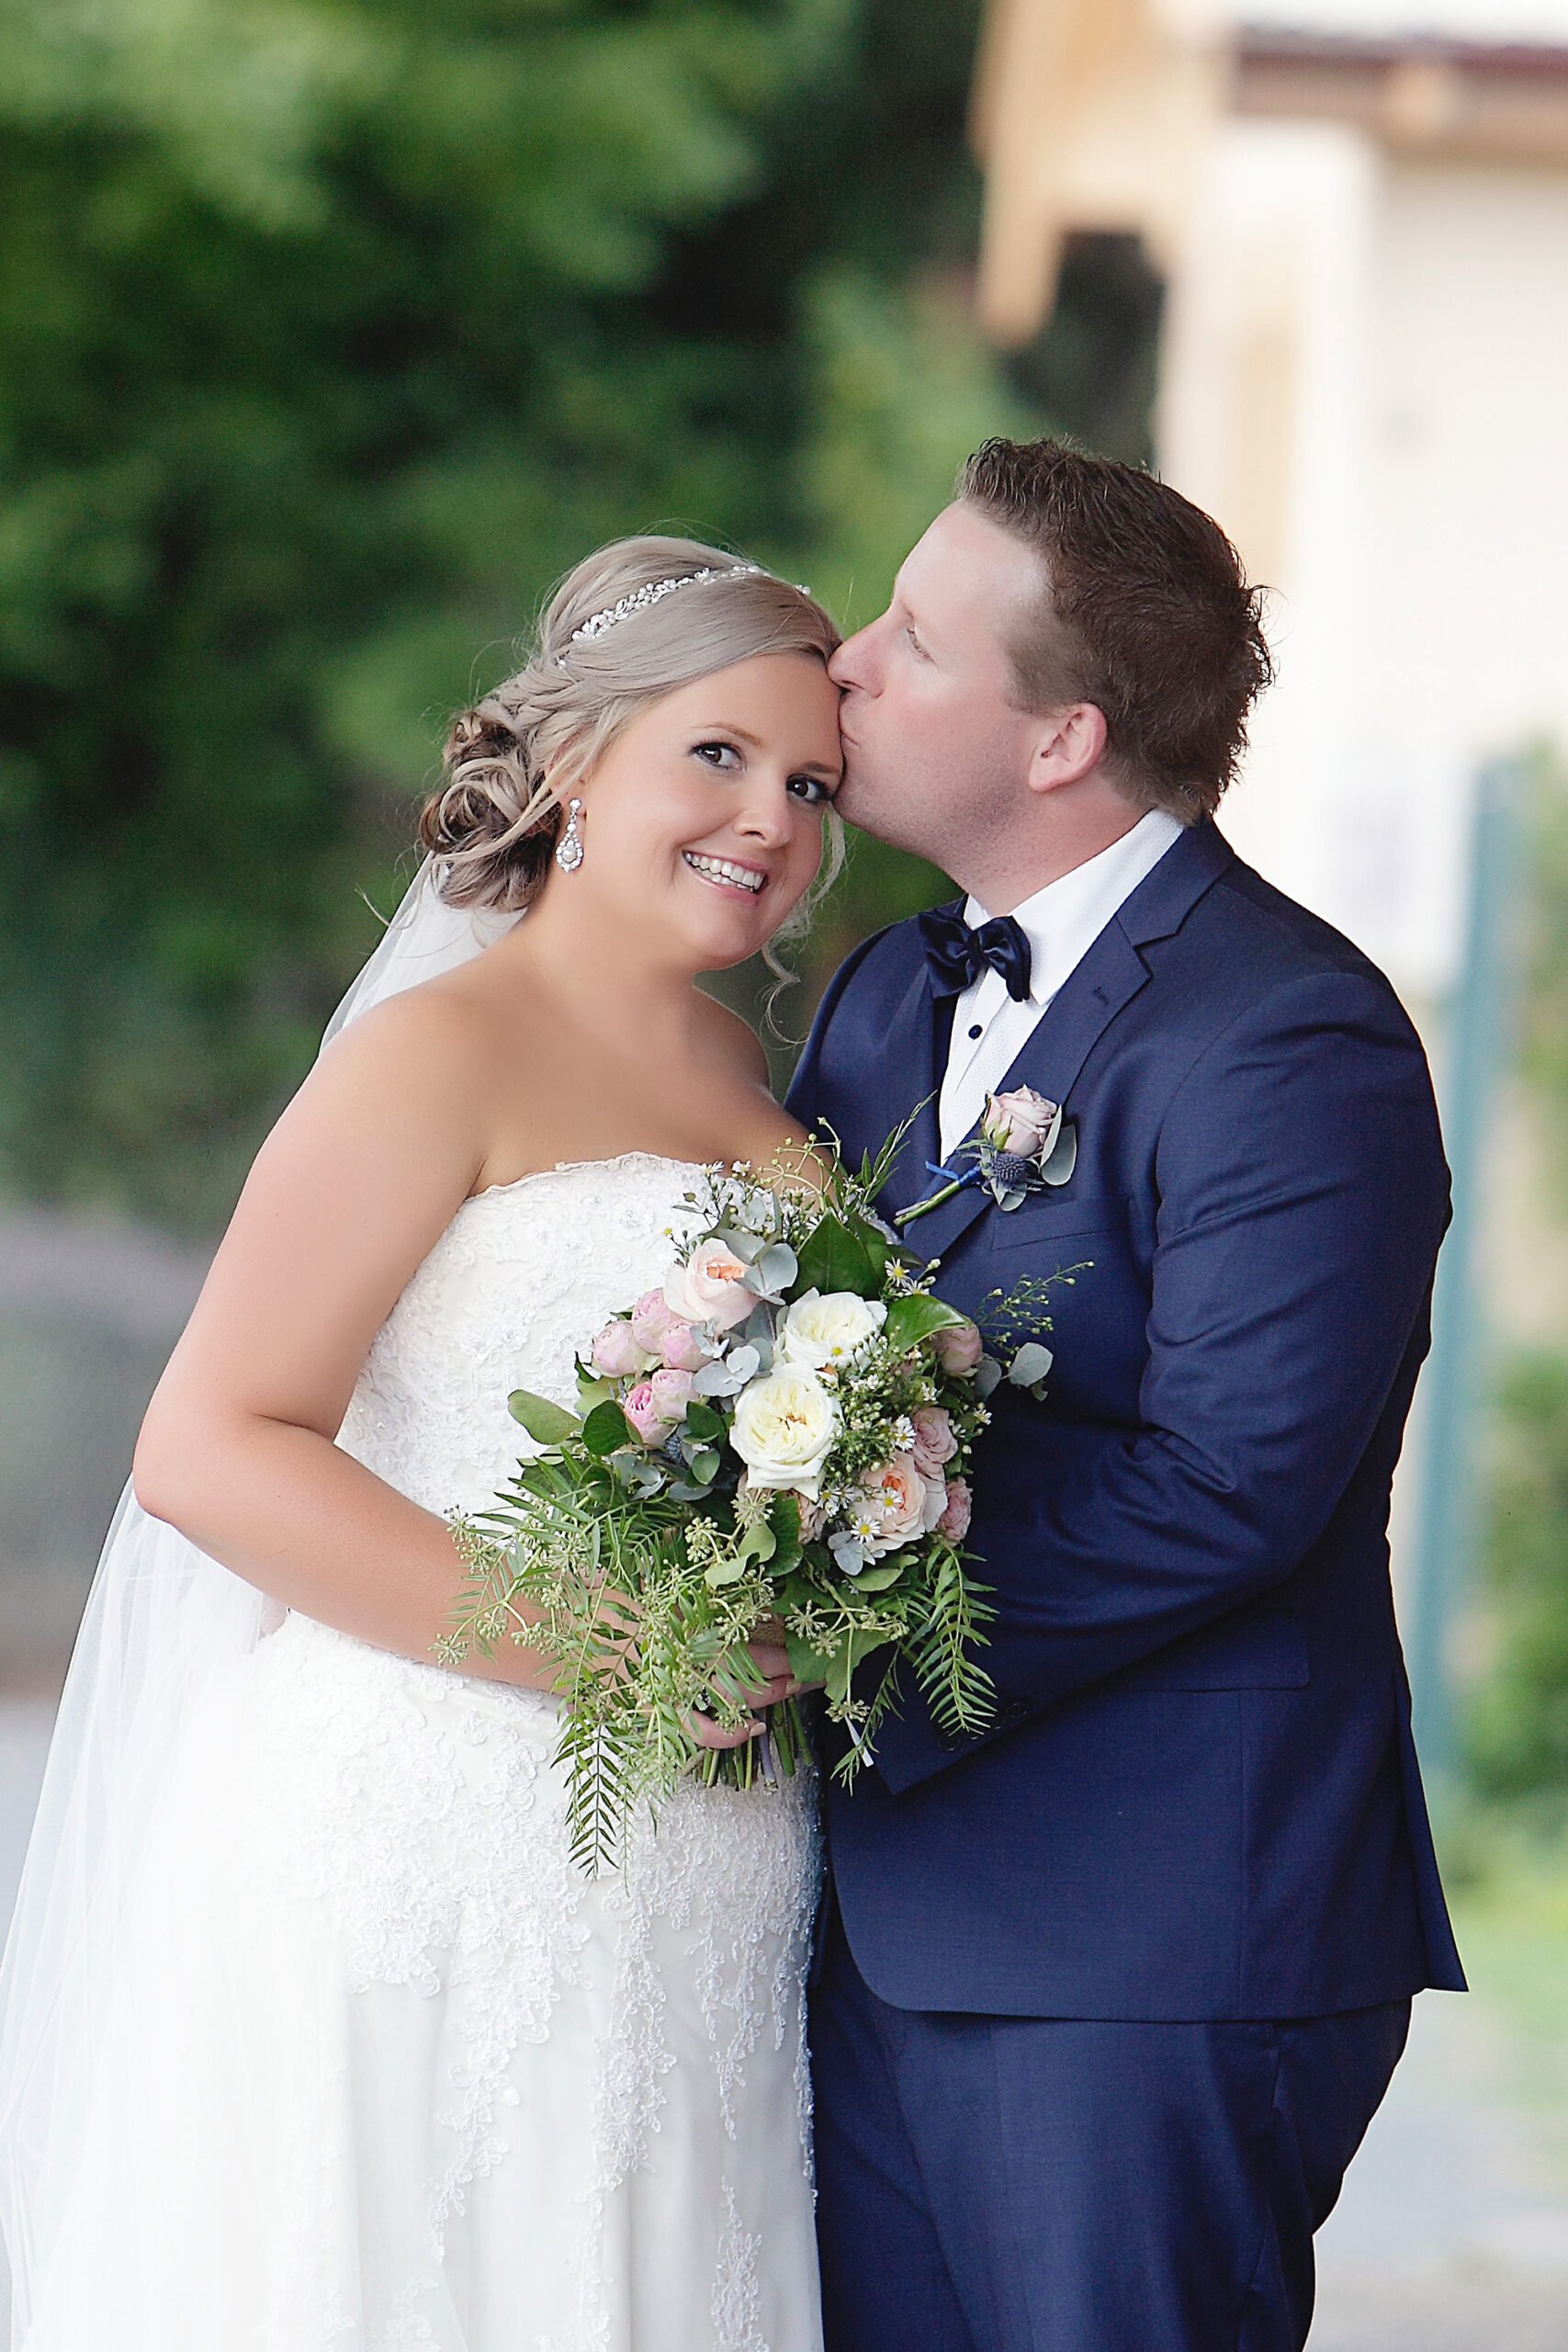 Head over boots in love: Jayne and Damien's classic country wedding ...